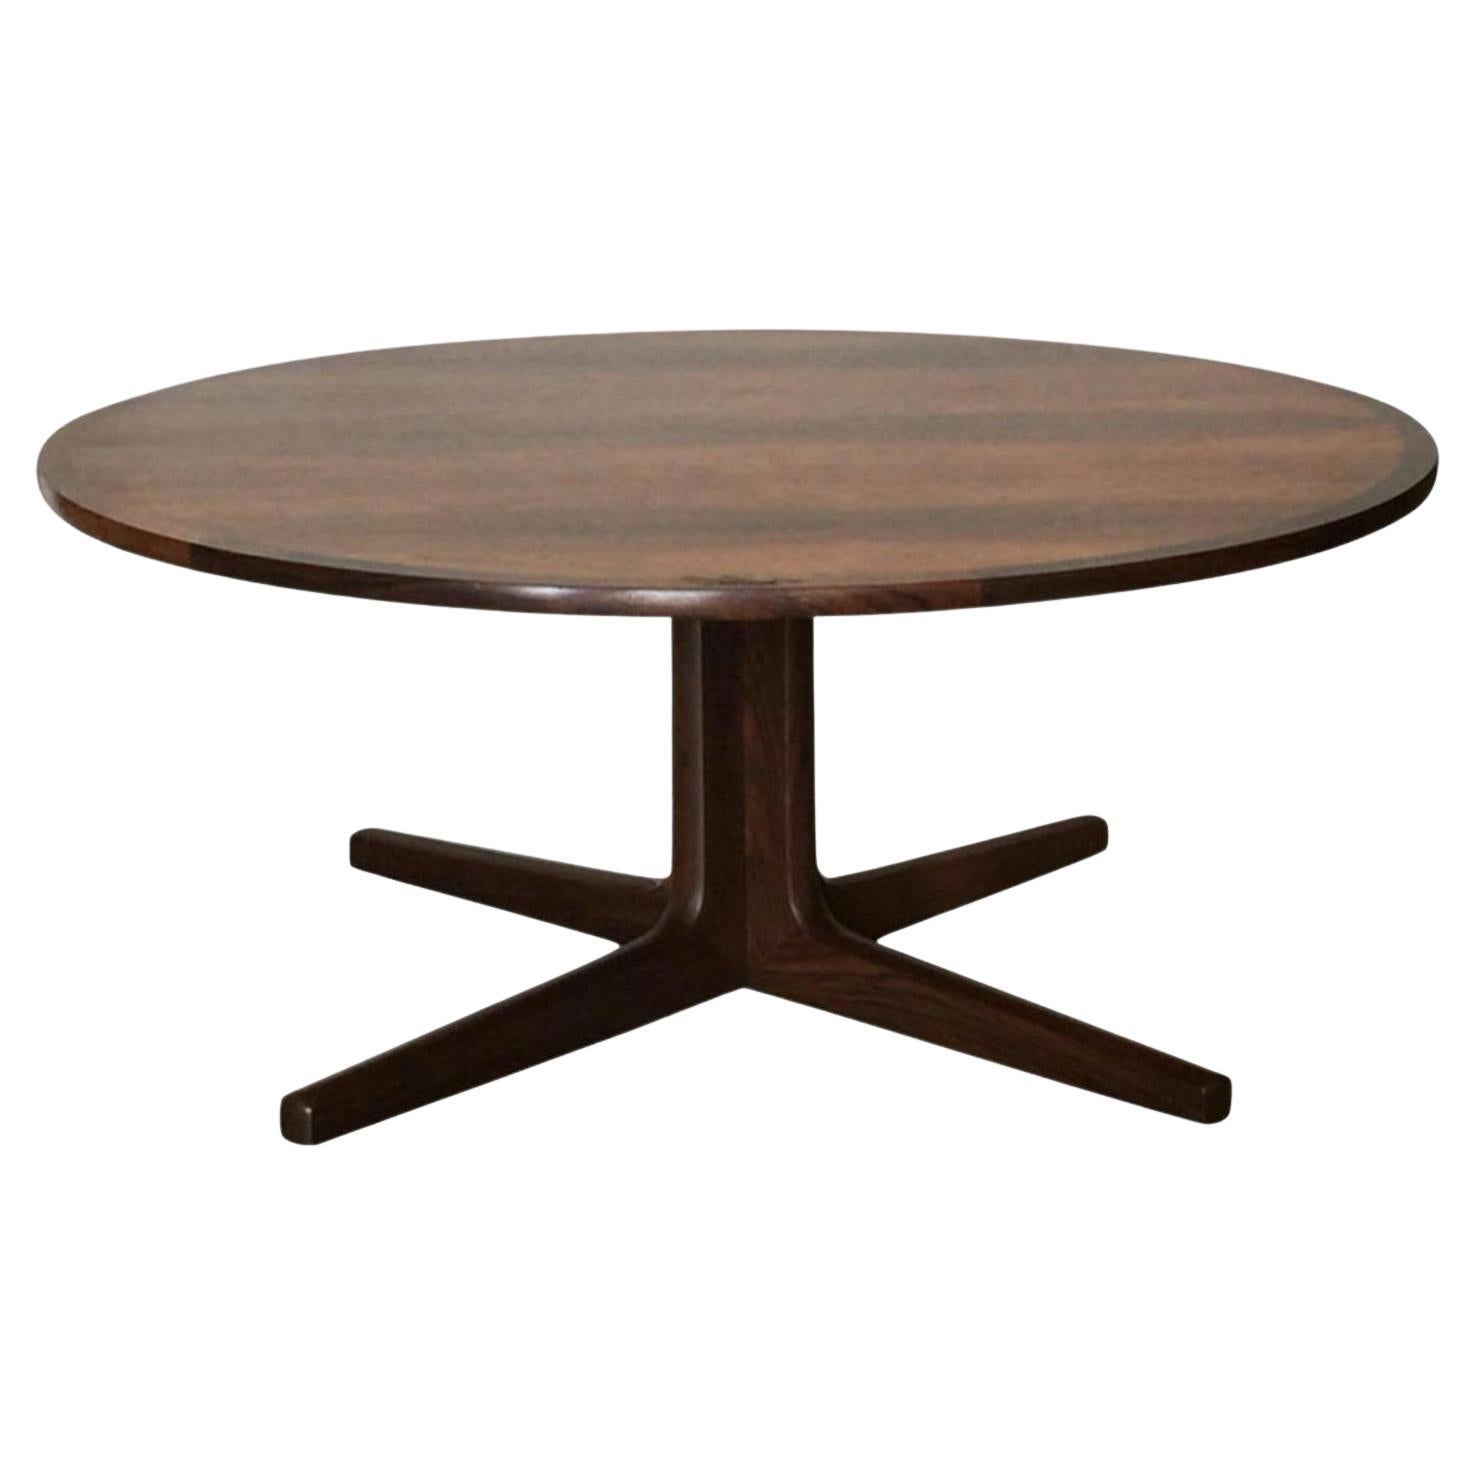 Impeccable Hans C. Andersen Danish Rosewood Round Coffee Table For Sale